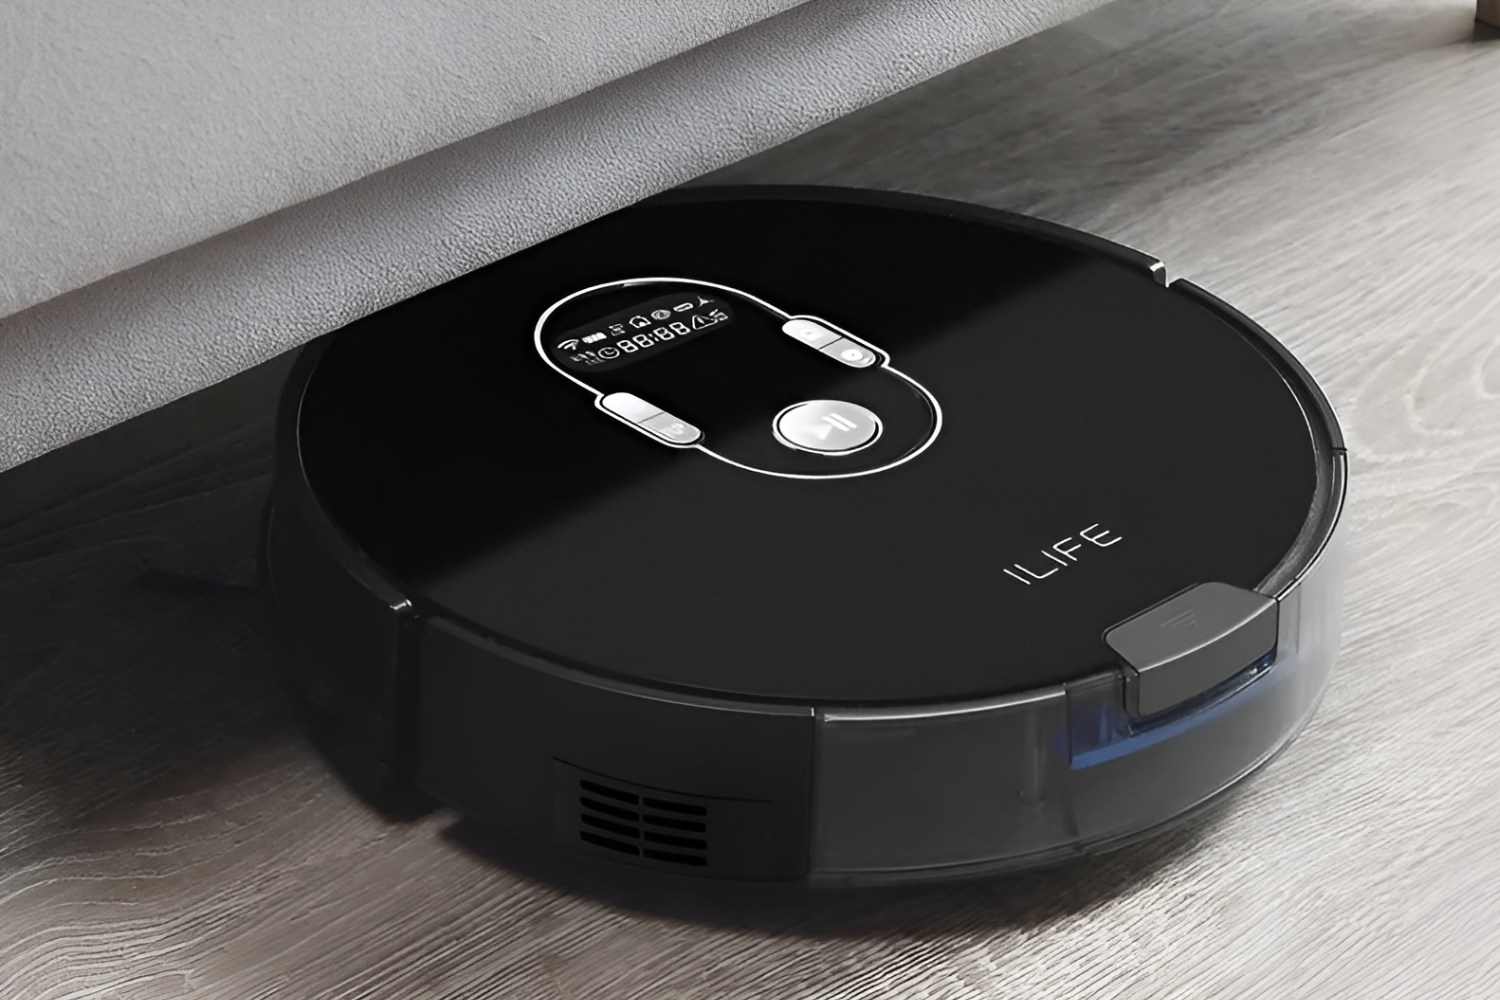 How To Use Ilife Robot Vacuum